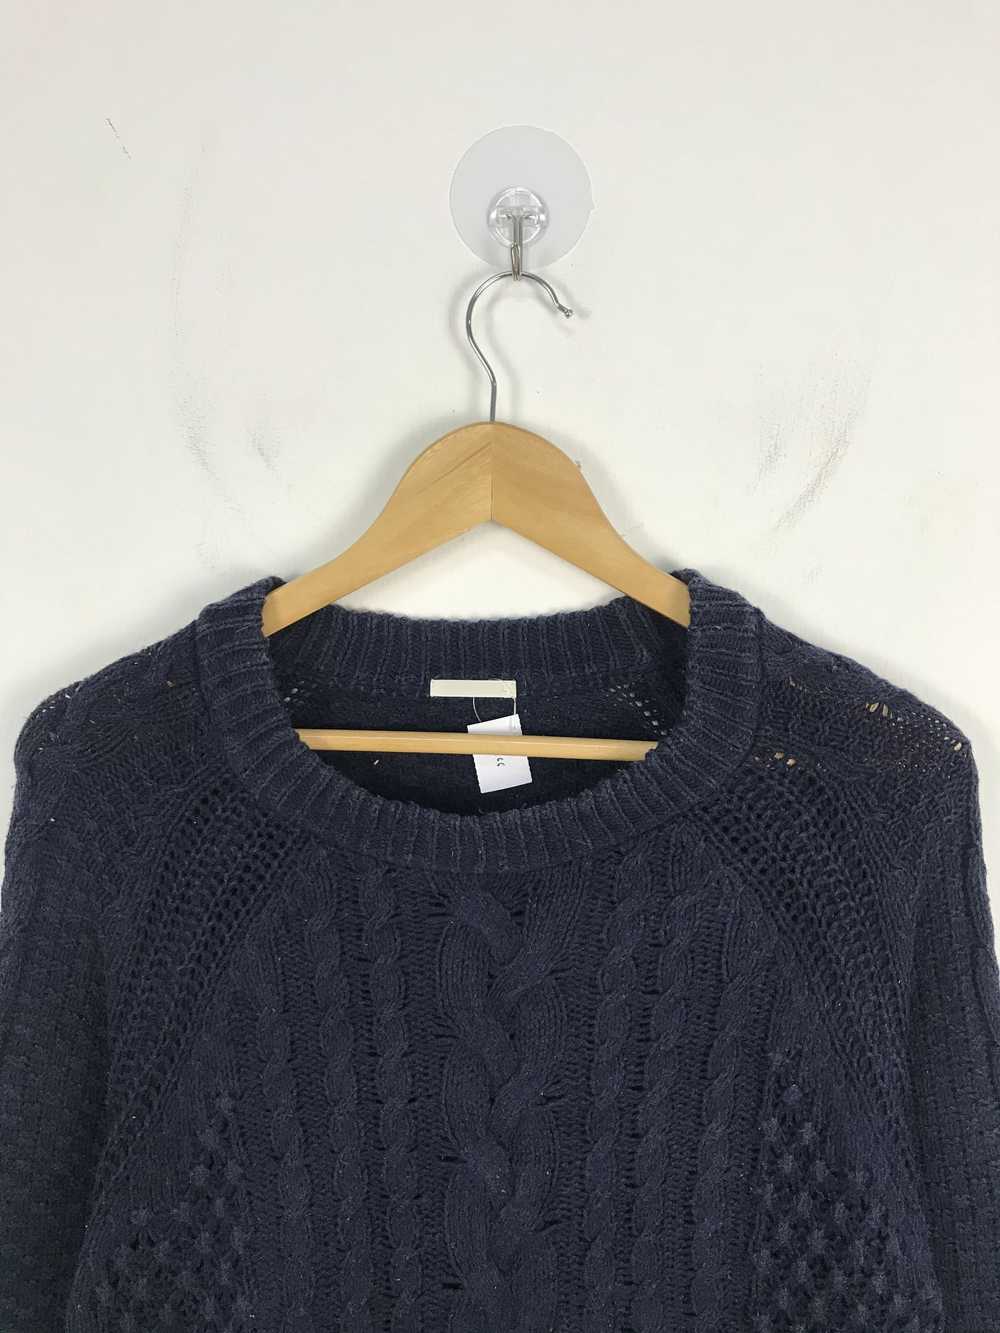 Aran Isles Knitwear × Coloured Cable Knit Sweater… - image 2